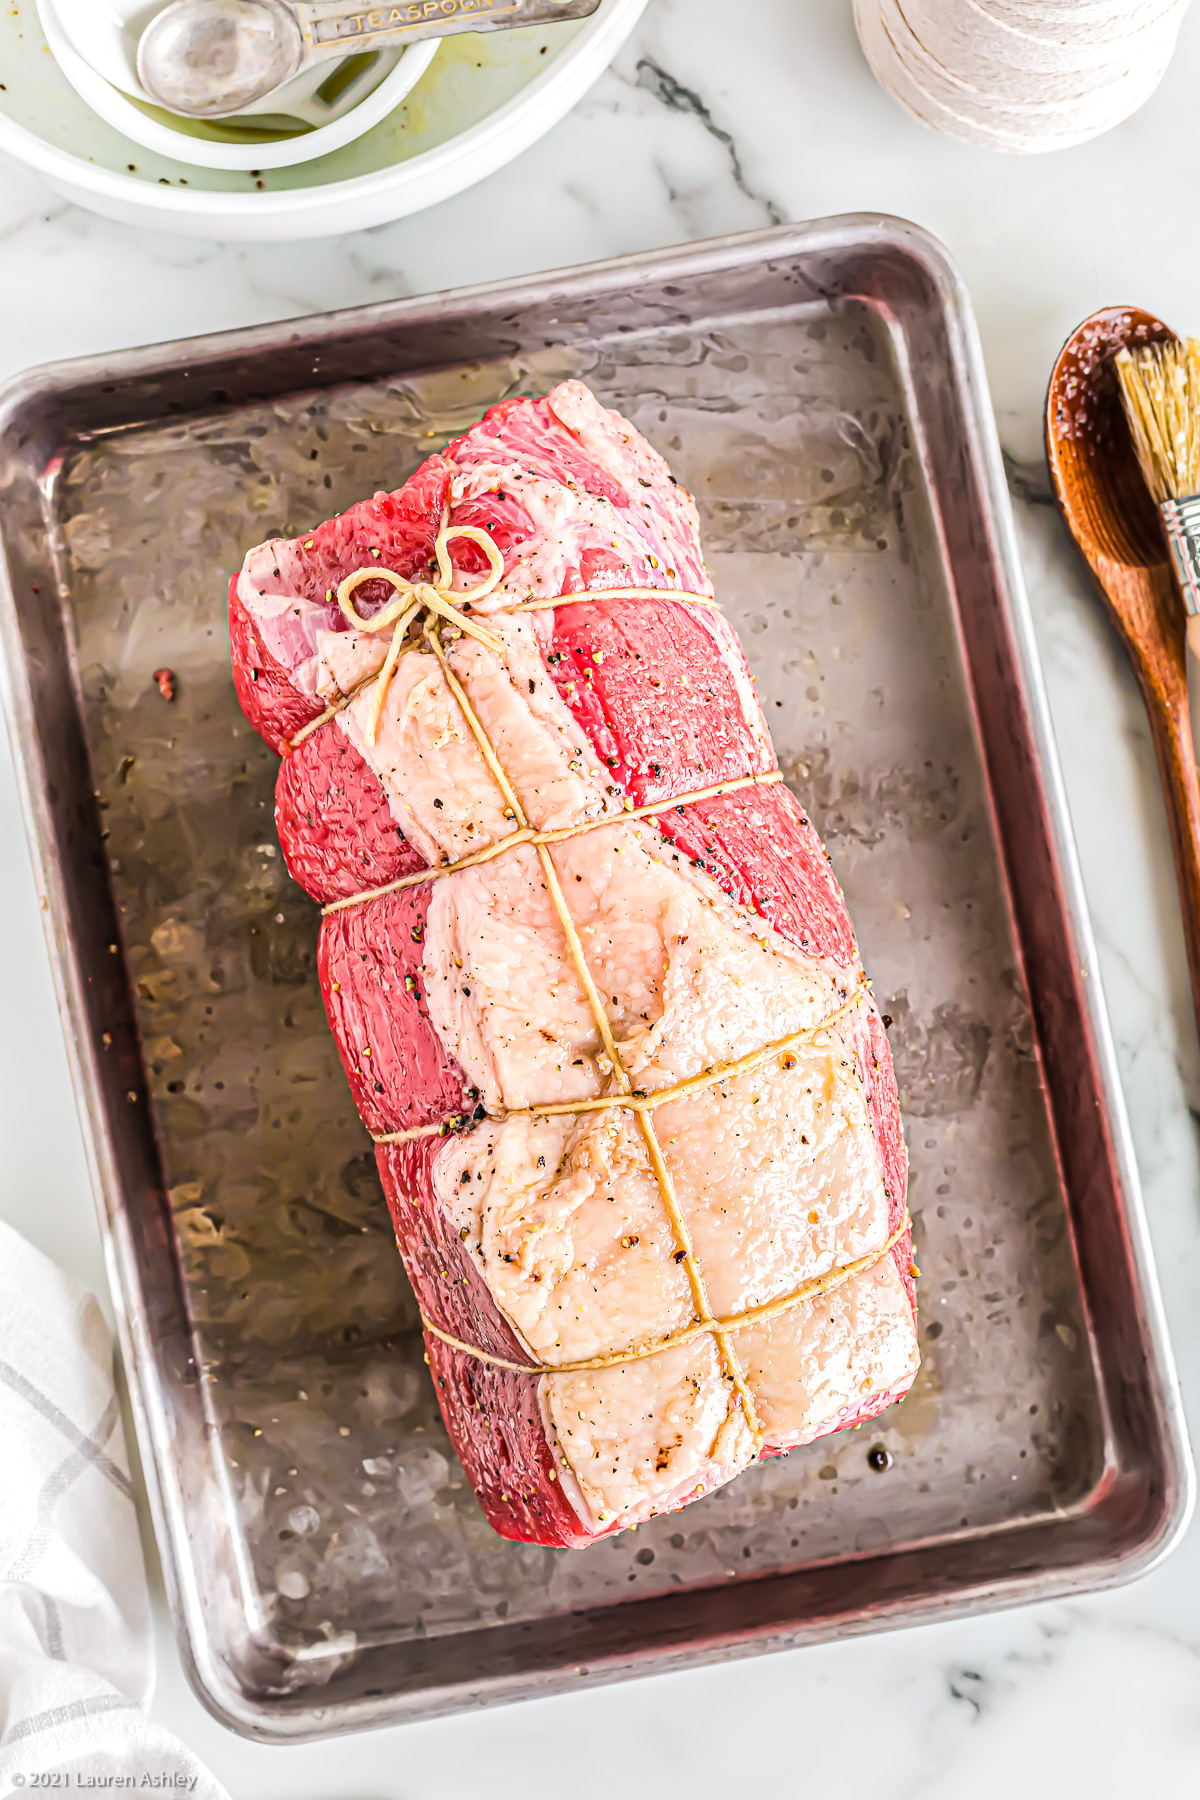 how long to cook 3lb roast beef